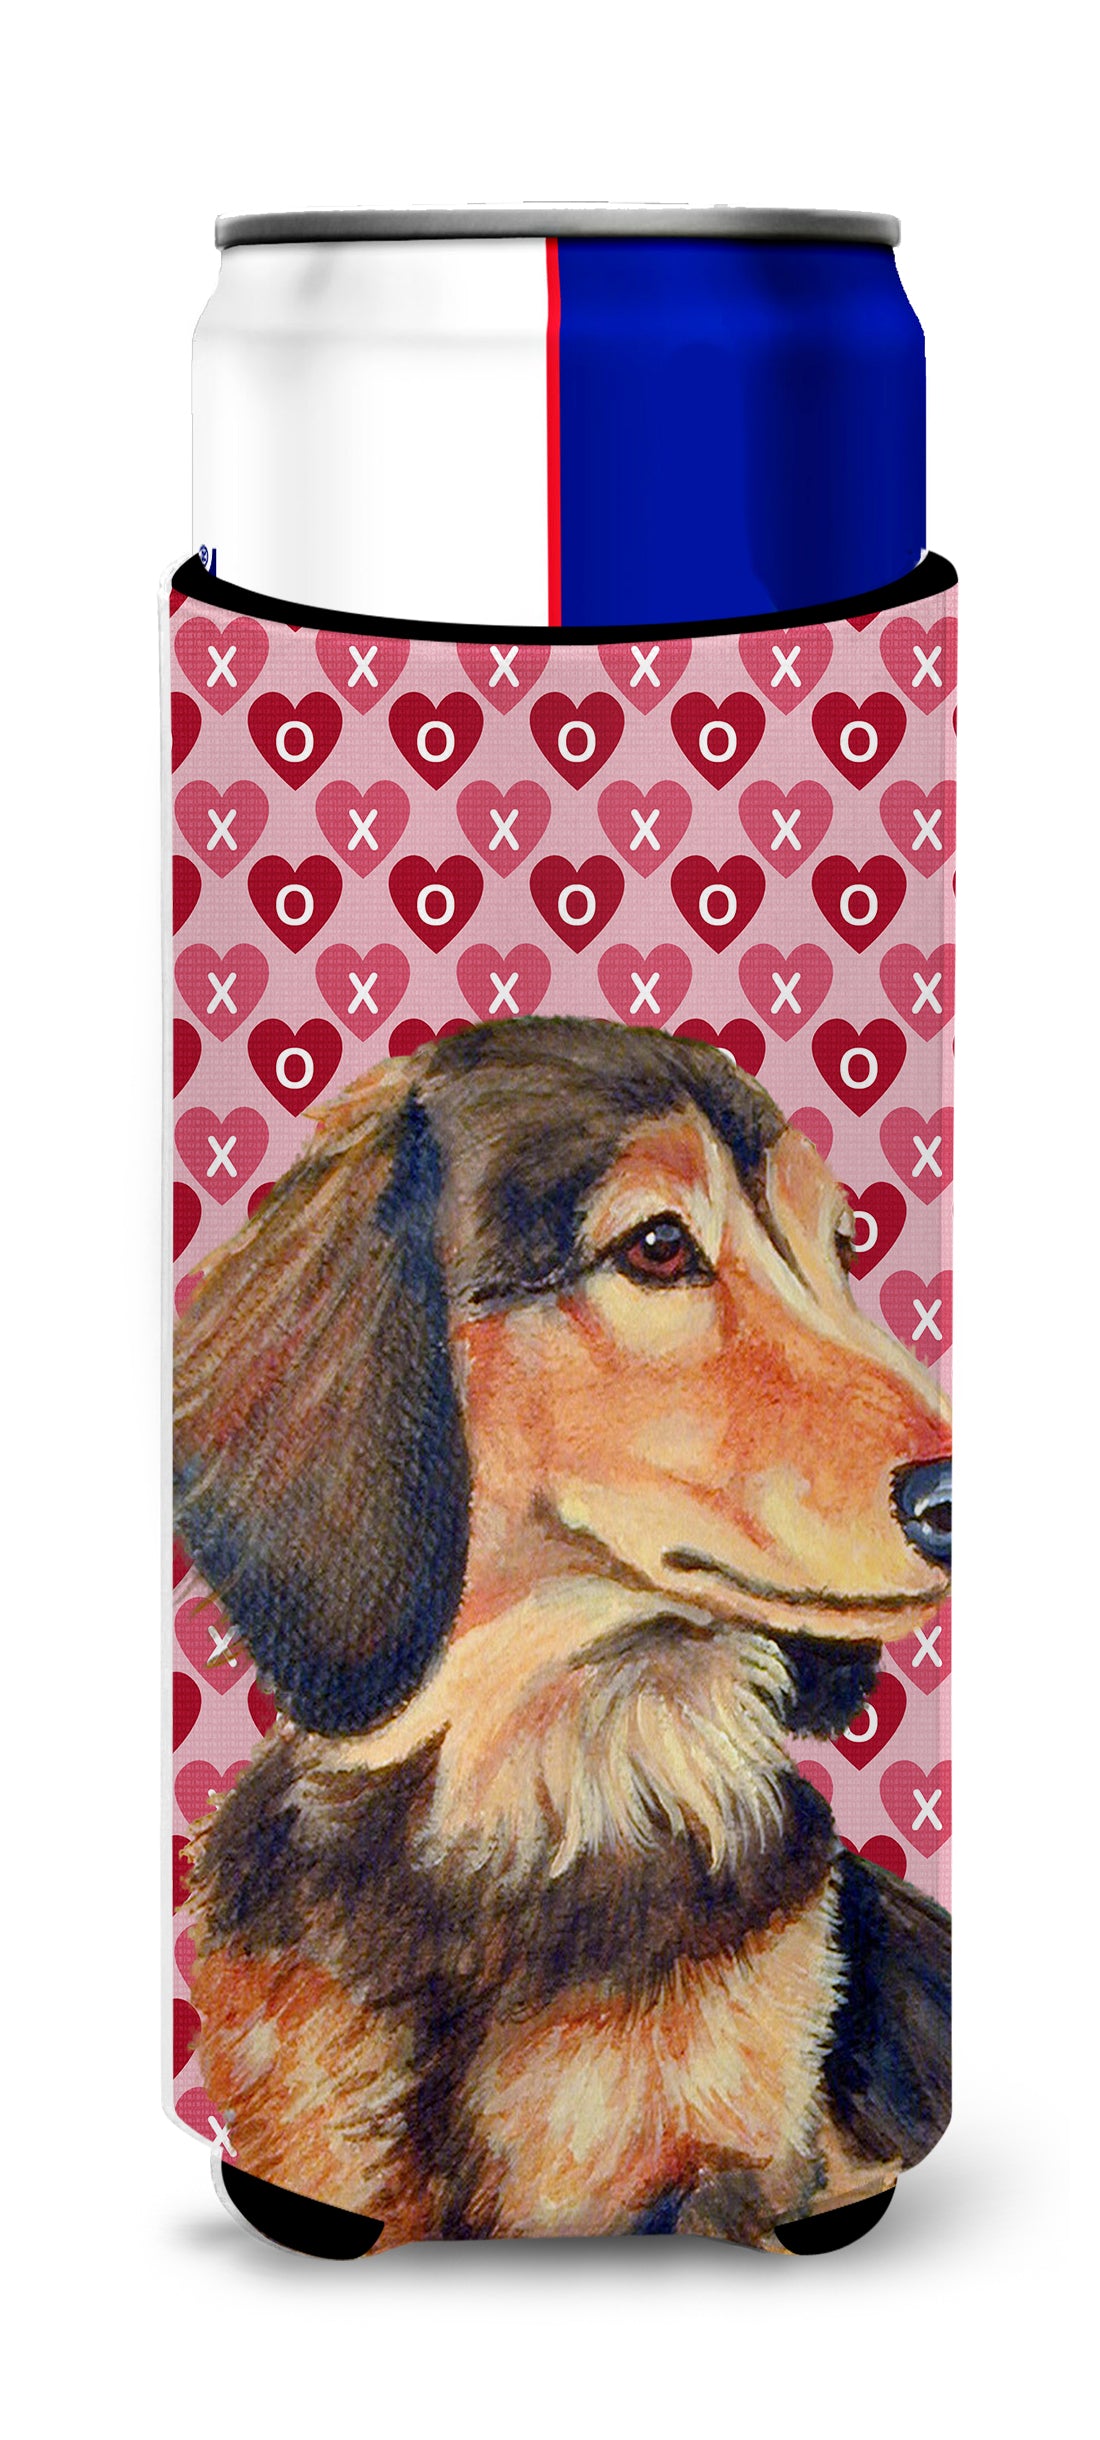 Dachshund Hearts Love and Valentine's Day Portrait Ultra Beverage Insulators for slim cans LH9166MUK